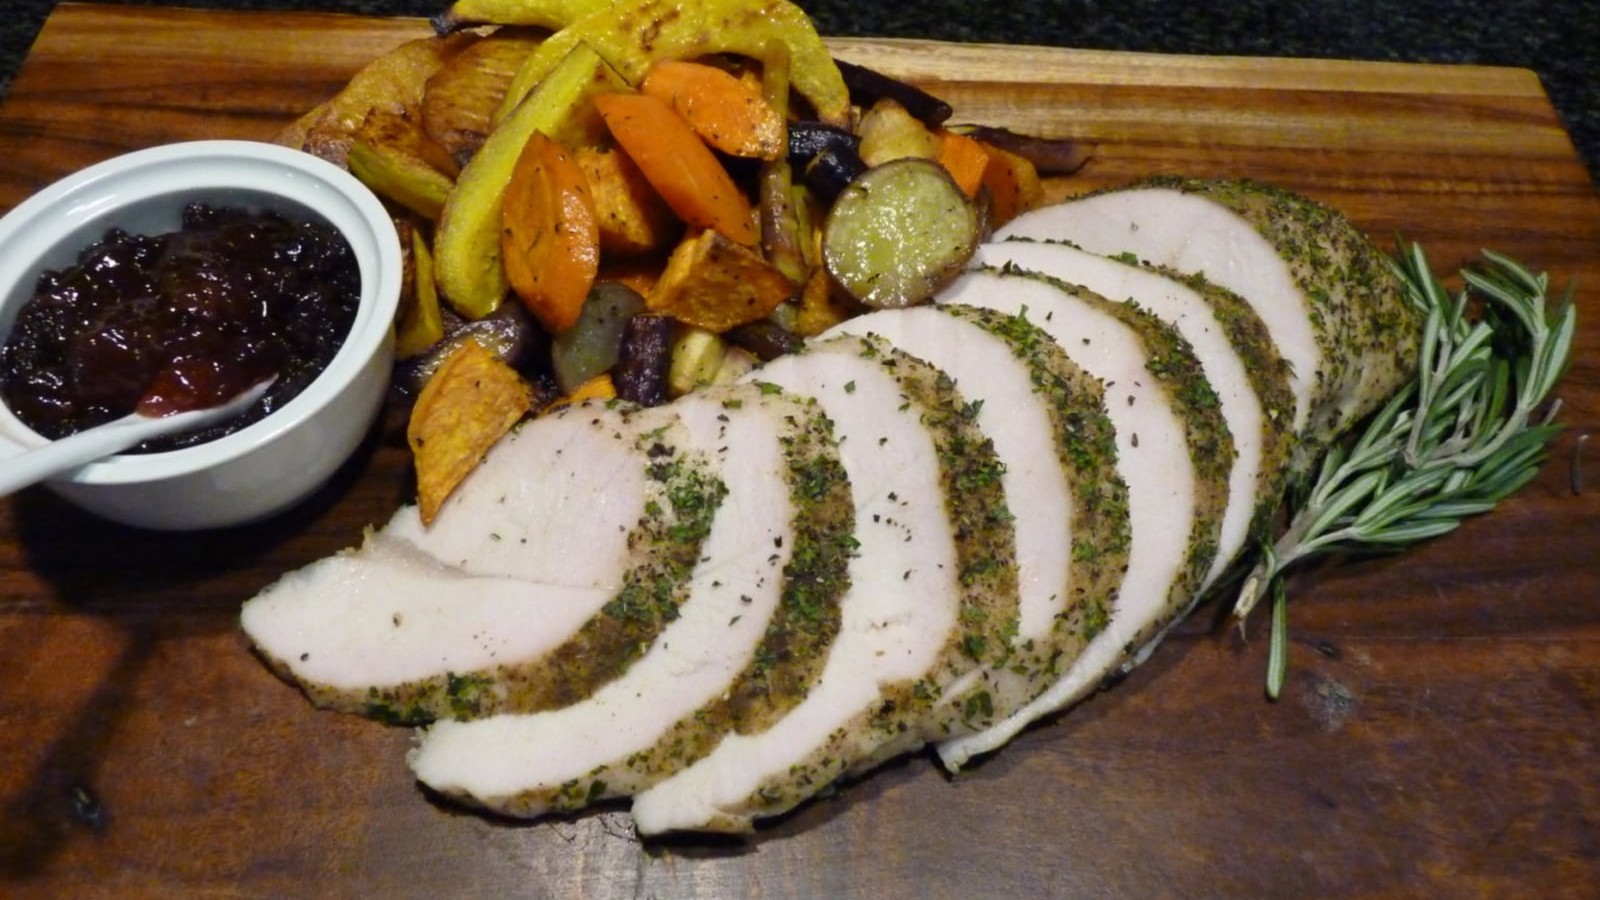 Image of Turkey Tenderloin, Roasted Root Vegetables and Caramelized Squash